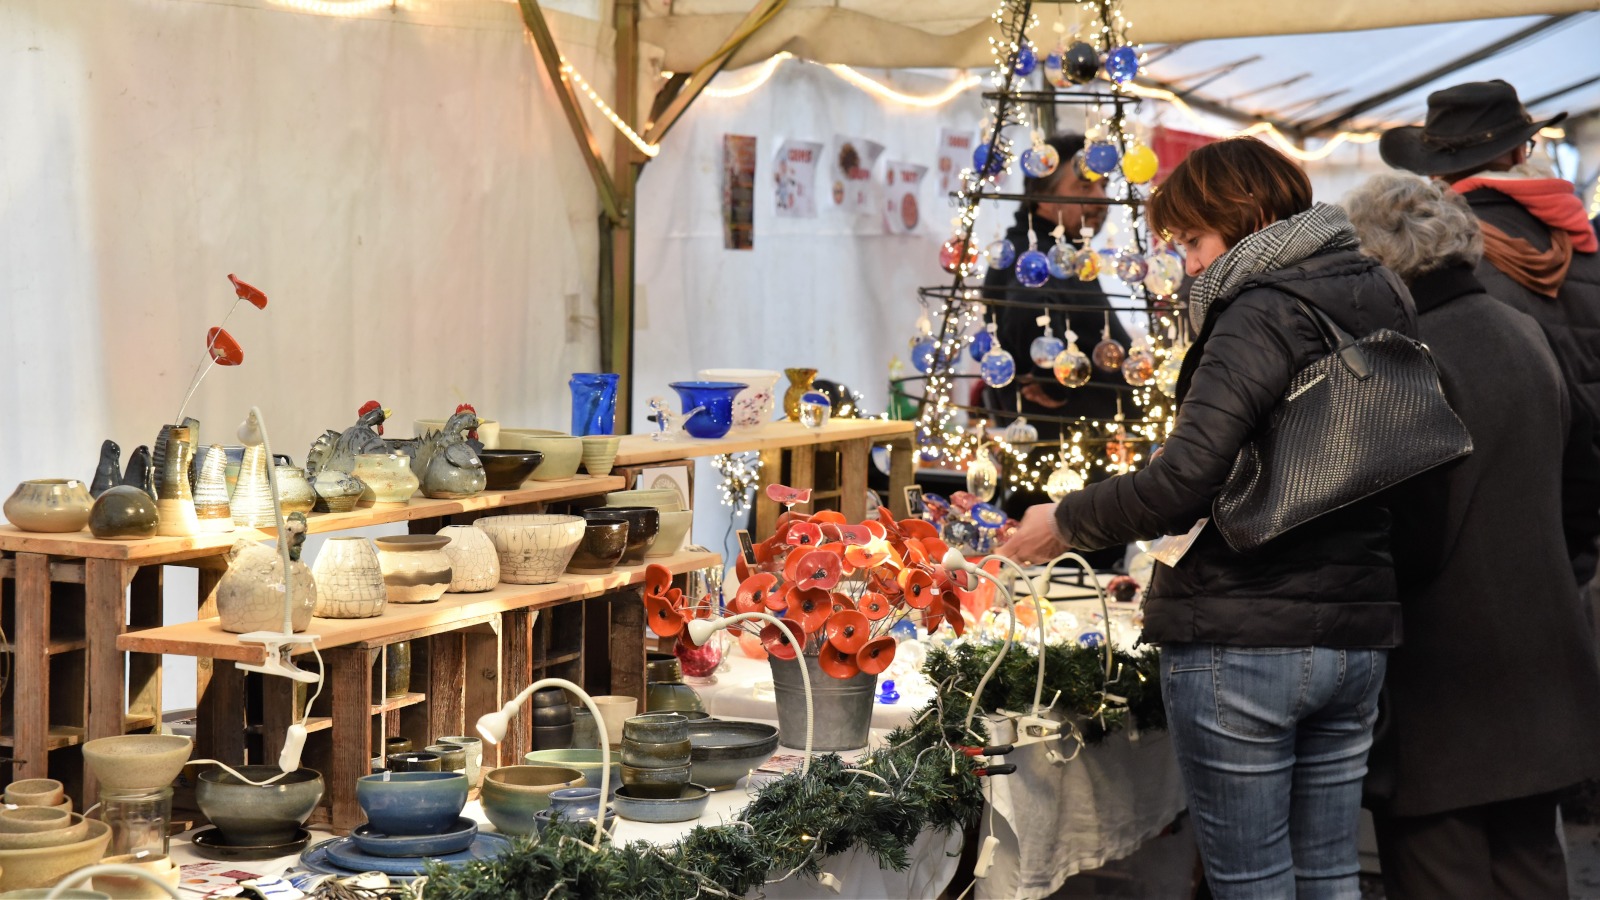 Exhibition of ceramic creations on one of the Christmas market stalls